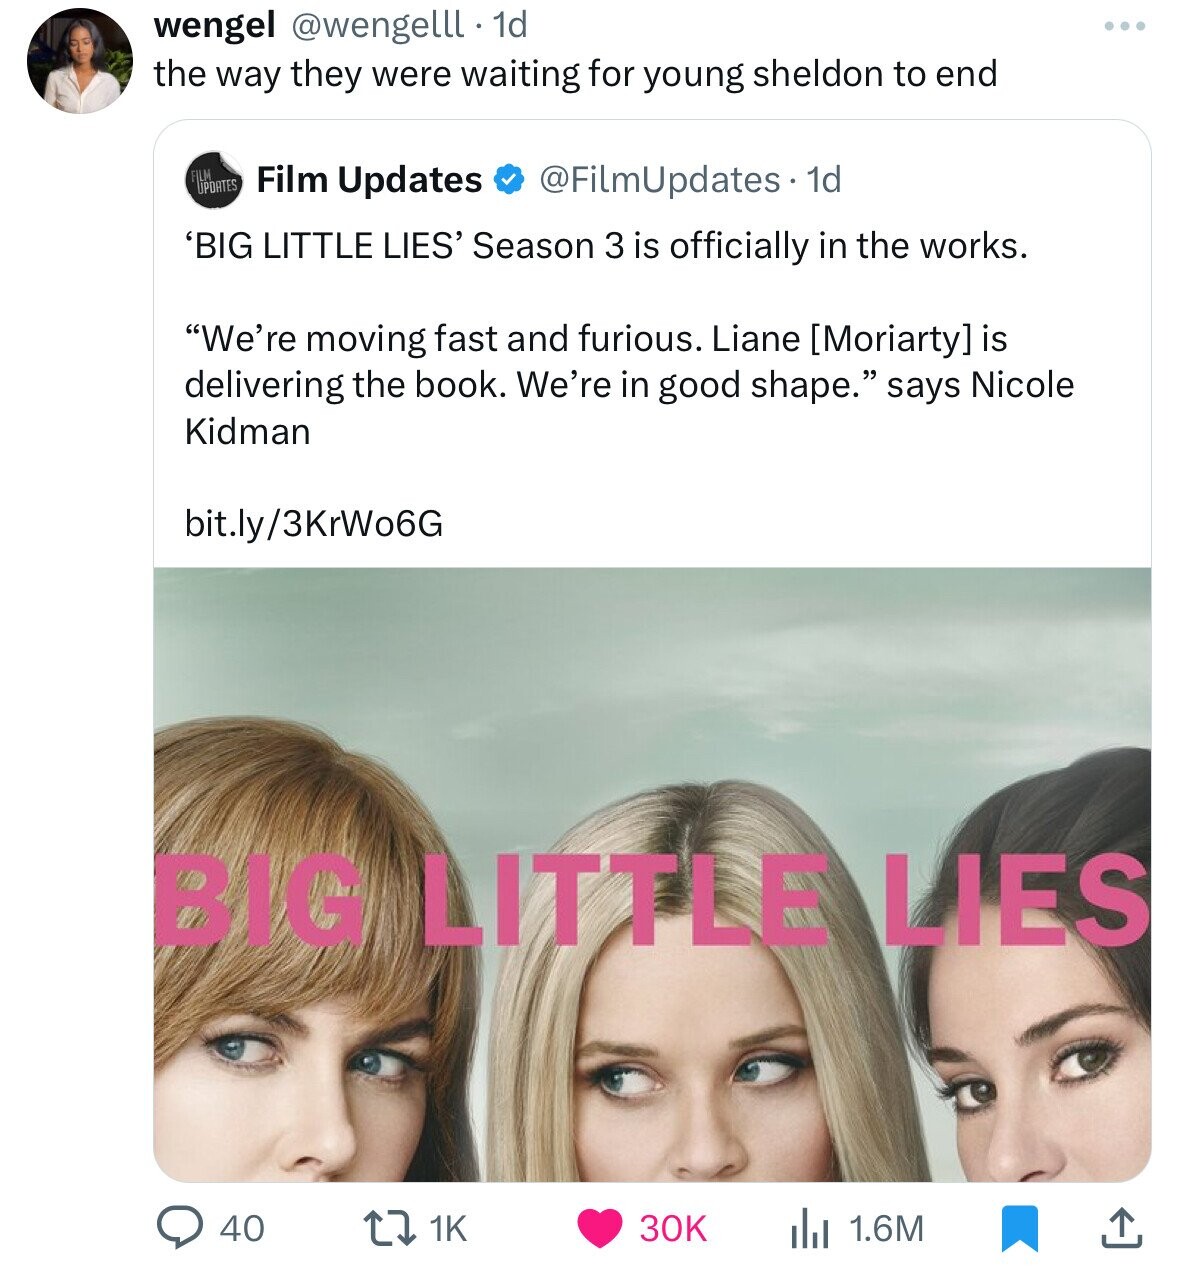 big little lies poster - wengel . 1d the way they were waiting for young sheldon to end Uportes Film Updates 1d 'Big Little Lies' Season 3 is officially in the works.